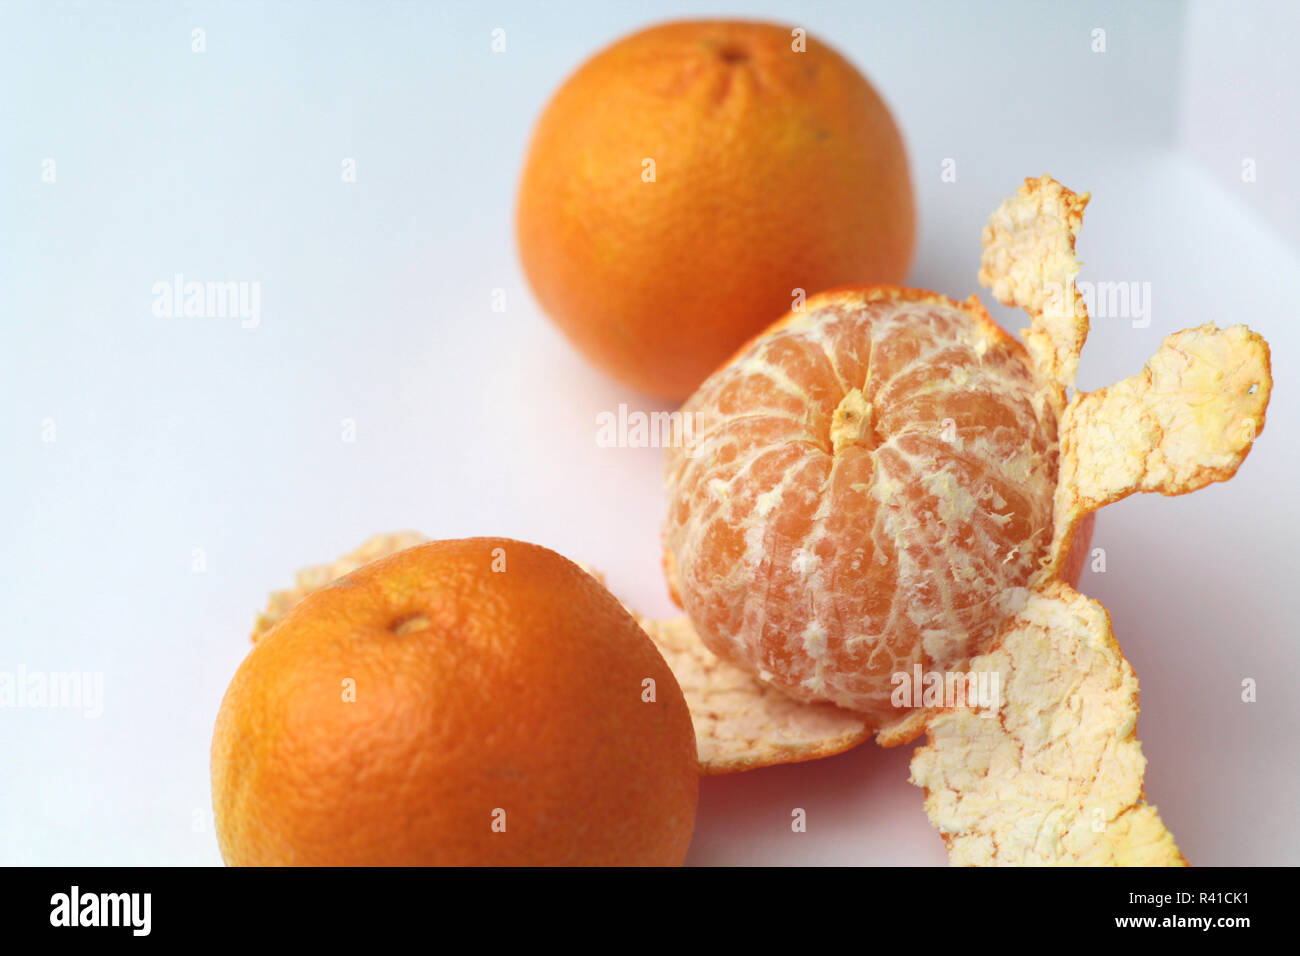 Mandarins, wholes and slices Stock Photo